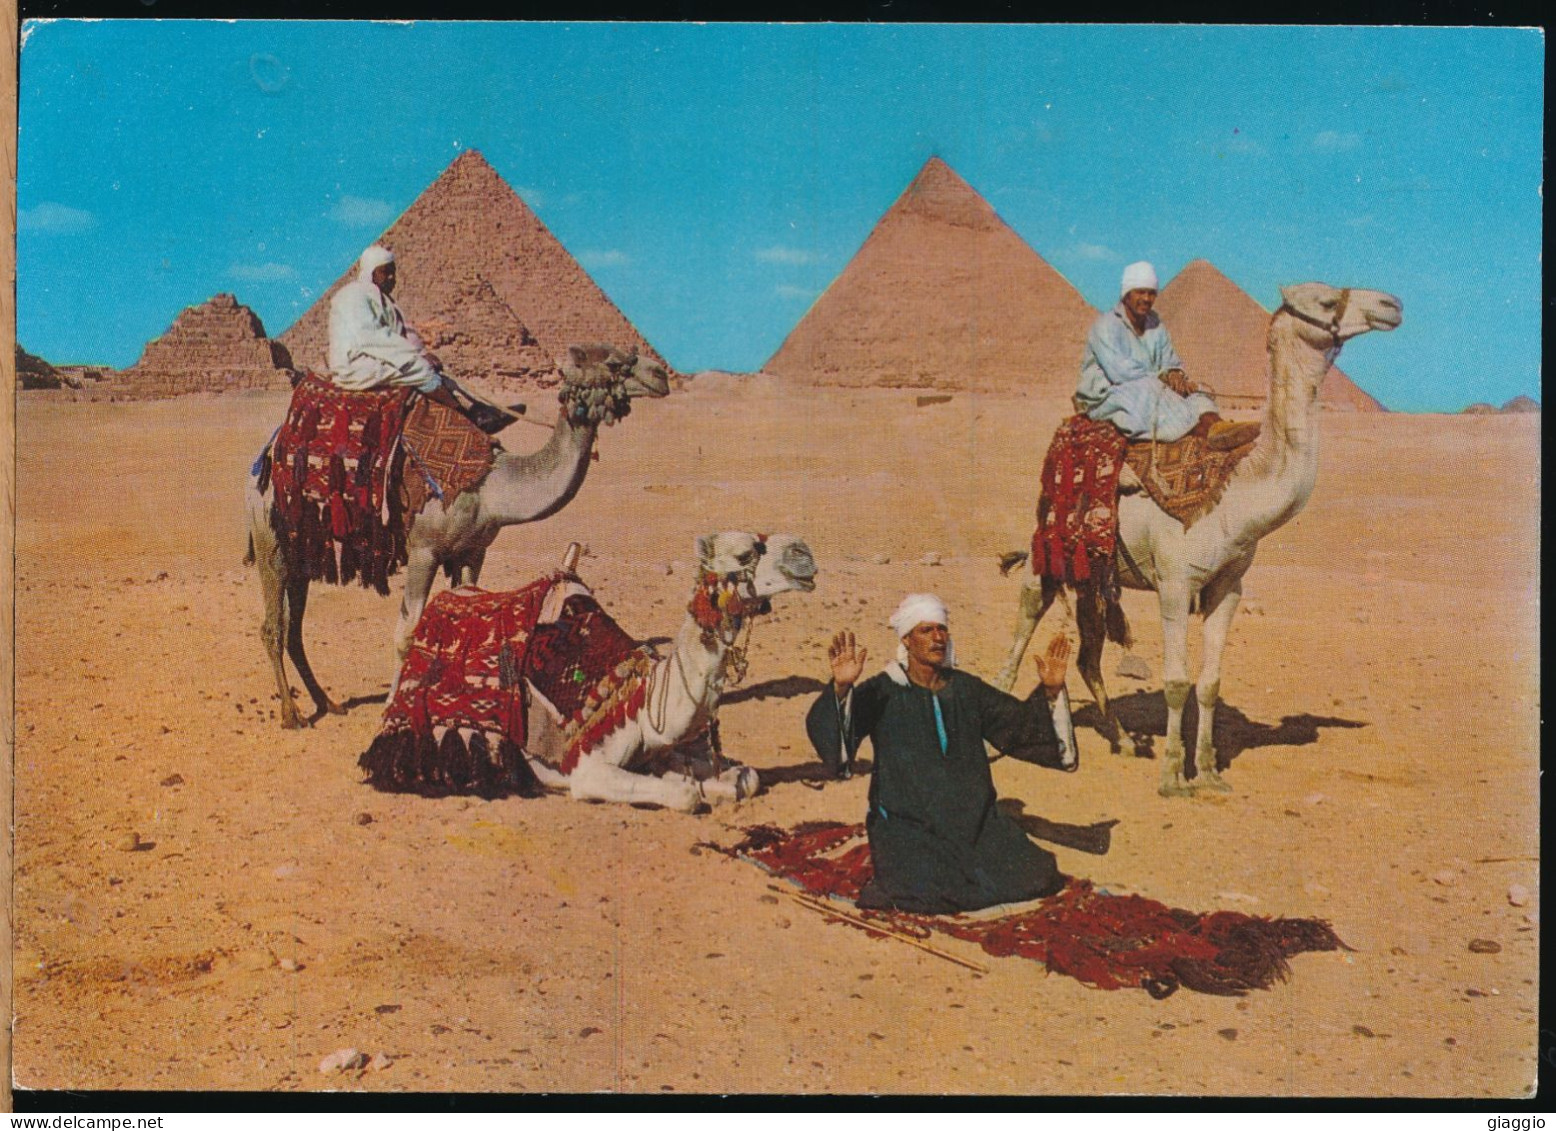 °°° 30862 - EGYPT - GIZA - ARAB CAMELRIDERS IN FRONT OF THE PYRAMIDS °°° - Guiza